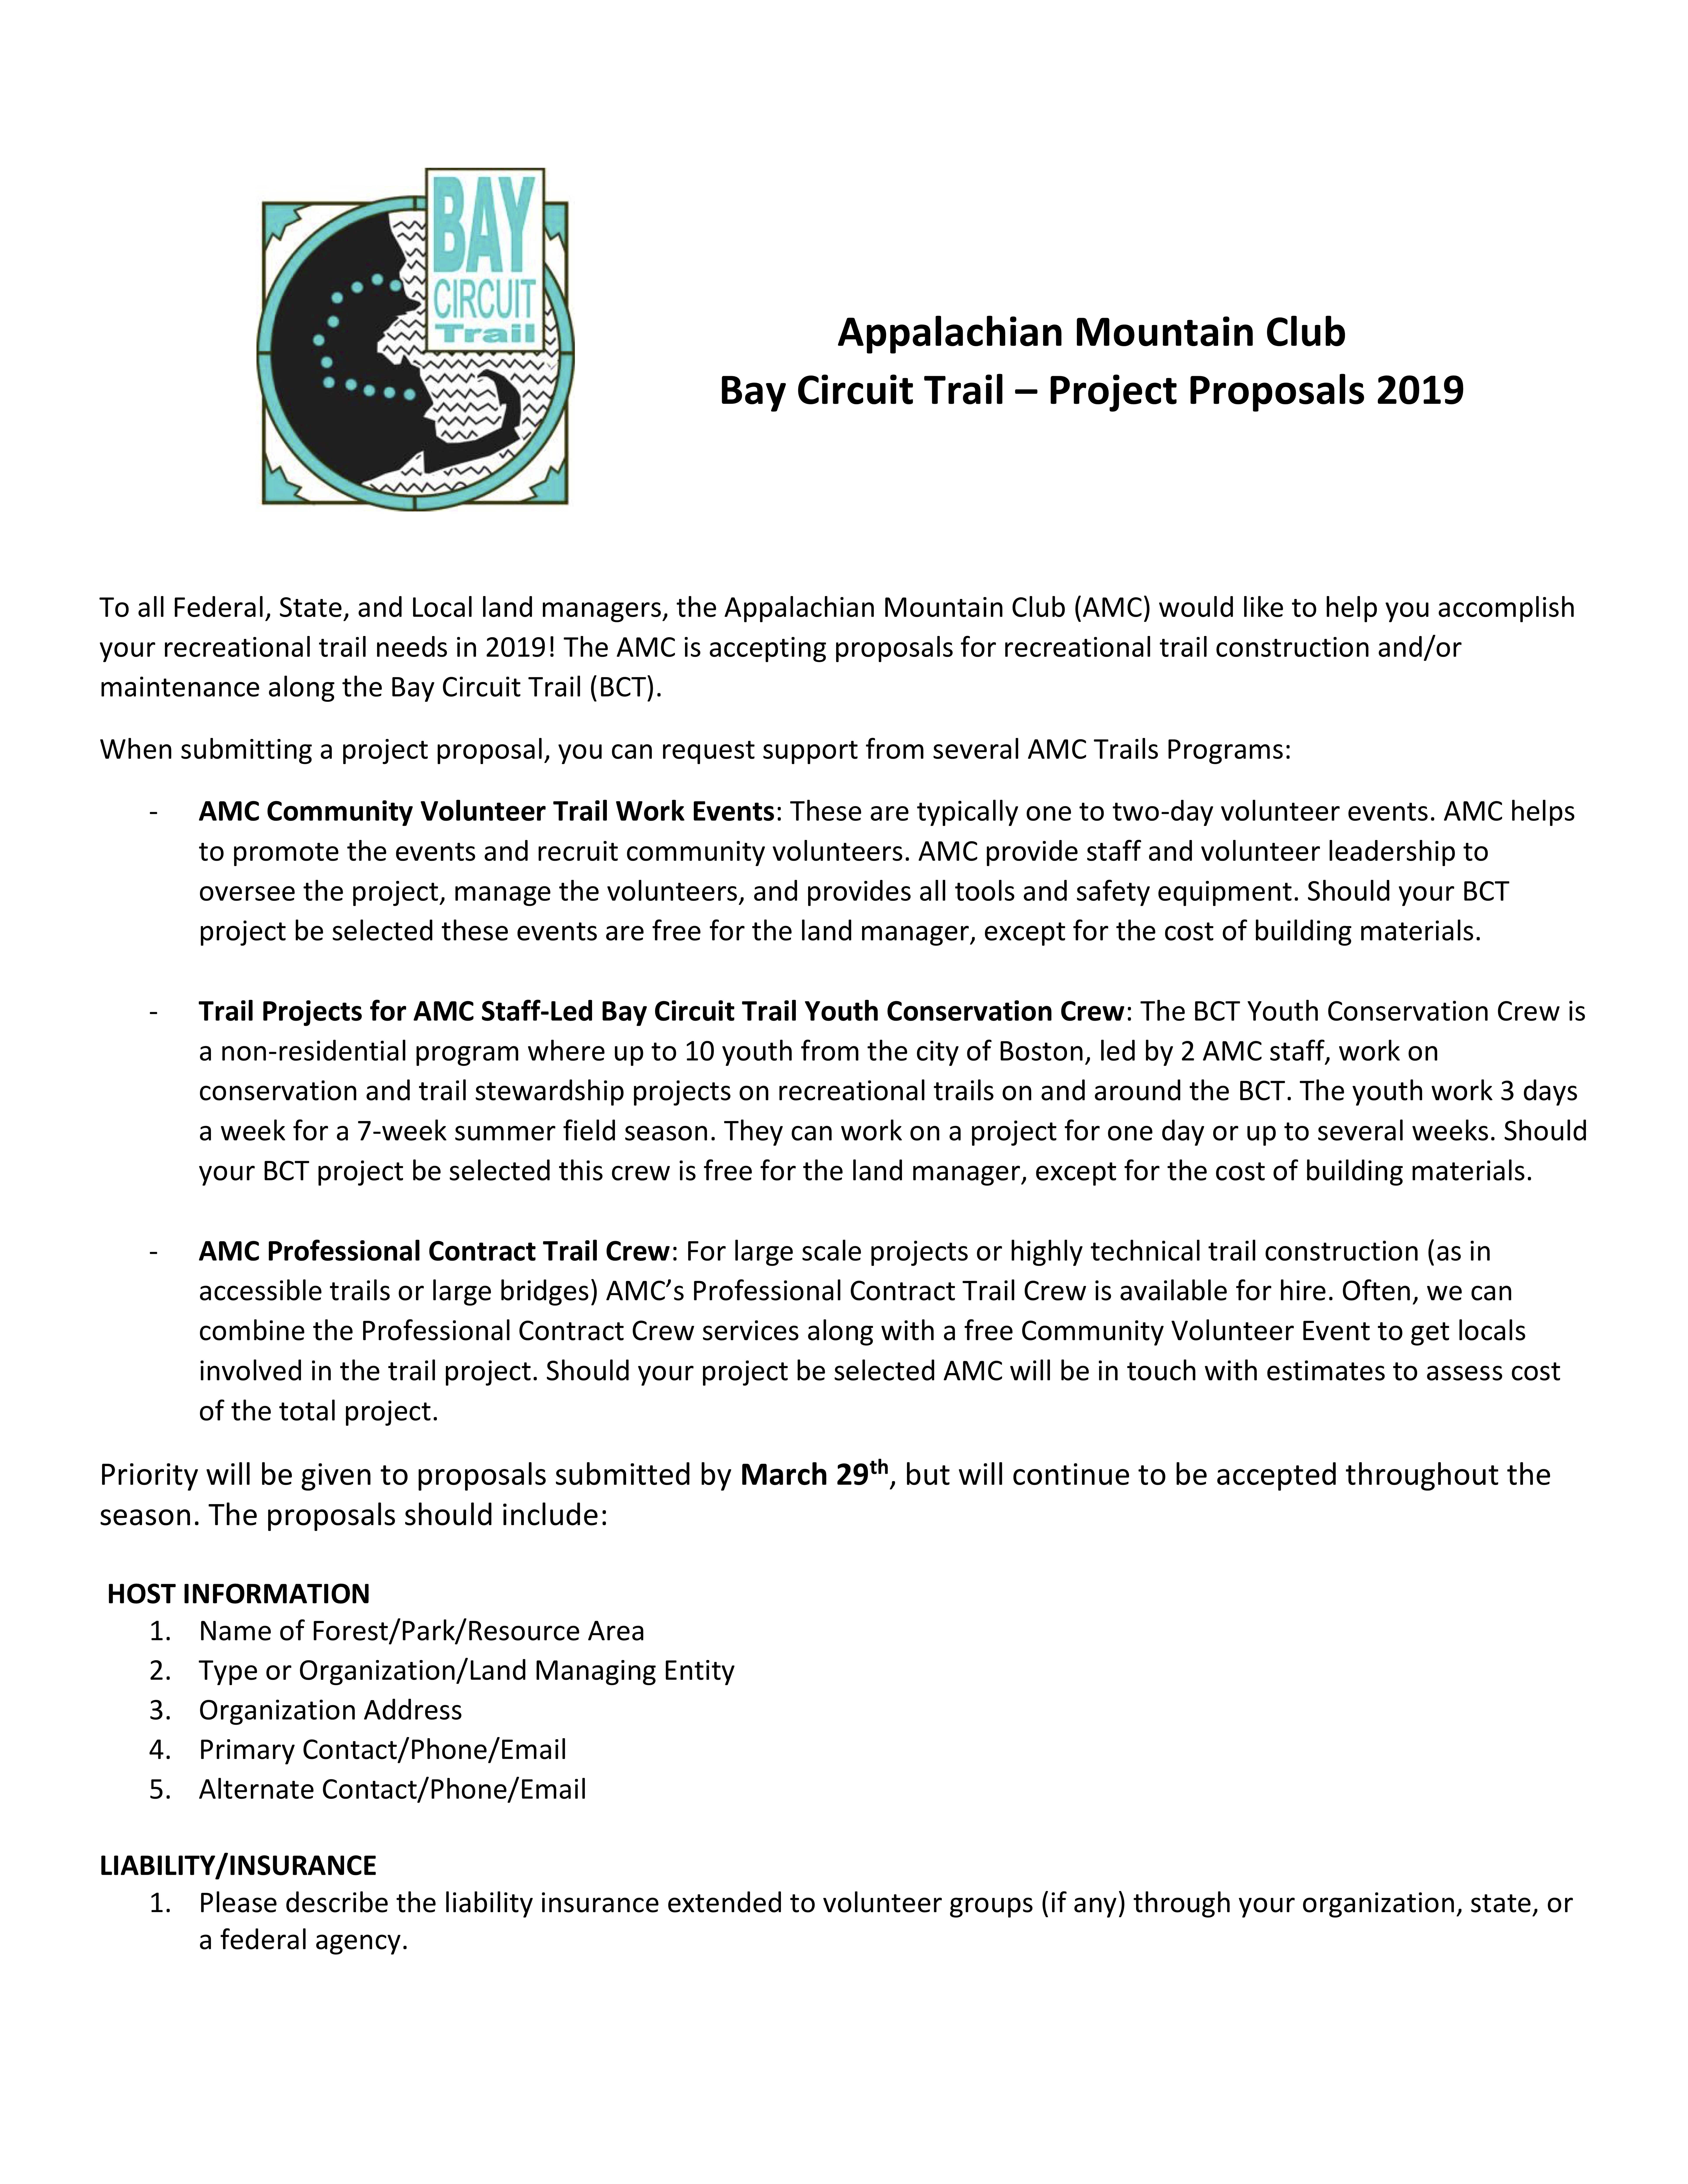 Appalachian Mountain Club Bay Circuit Trail – Project Proposals 2019
To all Federal, State, and Local land managers, the Appalachian Mountain Club (AMC) would like to help you accomplish your recreational trail needs in 2019! The AMC is accepting proposals for recreational trail construction and/or maintenance along the Bay Circuit Trail (BCT).
When submitting a project proposal, you can request support from several AMC Trails Programs:
- AMC Community Volunteer Trail Work Events: These are typically one to two-day volunteer events. AMC helps to promote the events and recruit community volunteers. AMC provide staff and volunteer leadership to oversee the project, manage the volunteers, and provides all tools and safety equipment. Should your BCT project be selected these events are free for the land manager, except for the cost of building materials.
- Trail Projects for AMC Staff-Led Bay Circuit Trail Youth Conservation Crew: The BCT Youth Conservation Crew is a non-residential program where up to 10 youth from the city of Boston, led by 2 AMC staff, work on conservation and trail stewardship projects on recreational trails on and around the BCT. The youth work 3 days a week for a 7-week summer field season. They can work on a project for one day or up to several weeks. Should your BCT project be selected this crew is free for the land manager, except for the cost of building materials.
- AMC Professional Contract Trail Crew: For large scale projects or highly technical trail construction (as in accessible trails or large bridges) AMC’s Professional Contract Trail Crew is available for hire. Often, we can combine the Professional Contract Crew services along with a free Community Volunteer Event to get locals involved in the trail project. Should your project be selected AMC will be in touch with estimates to assess cost of the total project.
Priority will be given to proposals submitted by March 29th, but will continue to be accepted throughout the season. The proposals should include:
HOST INFORMATION
1. Name of Forest/Park/Resource Area
2. Type or Organization/Land Managing Entity
3. Organization Address
4. Primary Contact/Phone/Email
5. Alternate Contact/Phone/Email
LIABILITY/INSURANCE
1. Please describe the liability insurance extended to volunteer groups (if any) through your organization, state, or a federal agency.
PROJECT DETAILS
1. Type of AMC Program you are requesting (Community Volunteer Event/BCT Youth Conservation Crew/Processional Contract Trail Crew)
2. Name of Trail where project will take place
3. Project Description (include maps/photos)
4. Distance of project from nearest parking area
5. Overall Project Rating (Easy/Moderate/Difficult/Strenuous/Very Strenuous)
6. Annual amount of trail users on this trail
PERMISSION/PERMITTING
1. The Host is responsible for securing permission and permits for trail projects. Please include project approval or letters of support in the proposal. Please note that all permitting does not need to be secured at the time of submission. Please indicate the anticipated timeline and progress of approvals in the proposal.
PROJECT BUILDING MATERIALS
1. For Community Volunteer Events and BCT Youth Conservation Crews the Host will be responsible for providing project building materials. In some cases, AMC may be able to assist in securing funds for a project, but the host site must indicate this in the proposal, and AMC will be in touch to see if we can assist.
2. For Professional Contract Trail Crew projects AMC will include material costs in our estimates after receiving proposals.
For any questions regarding submitting your project proposal please contact, Christine Viola: AMC Bay Circuit Trail Volunteer Programs Supervisor, cviola@outdoors.org, 617-391-6586.